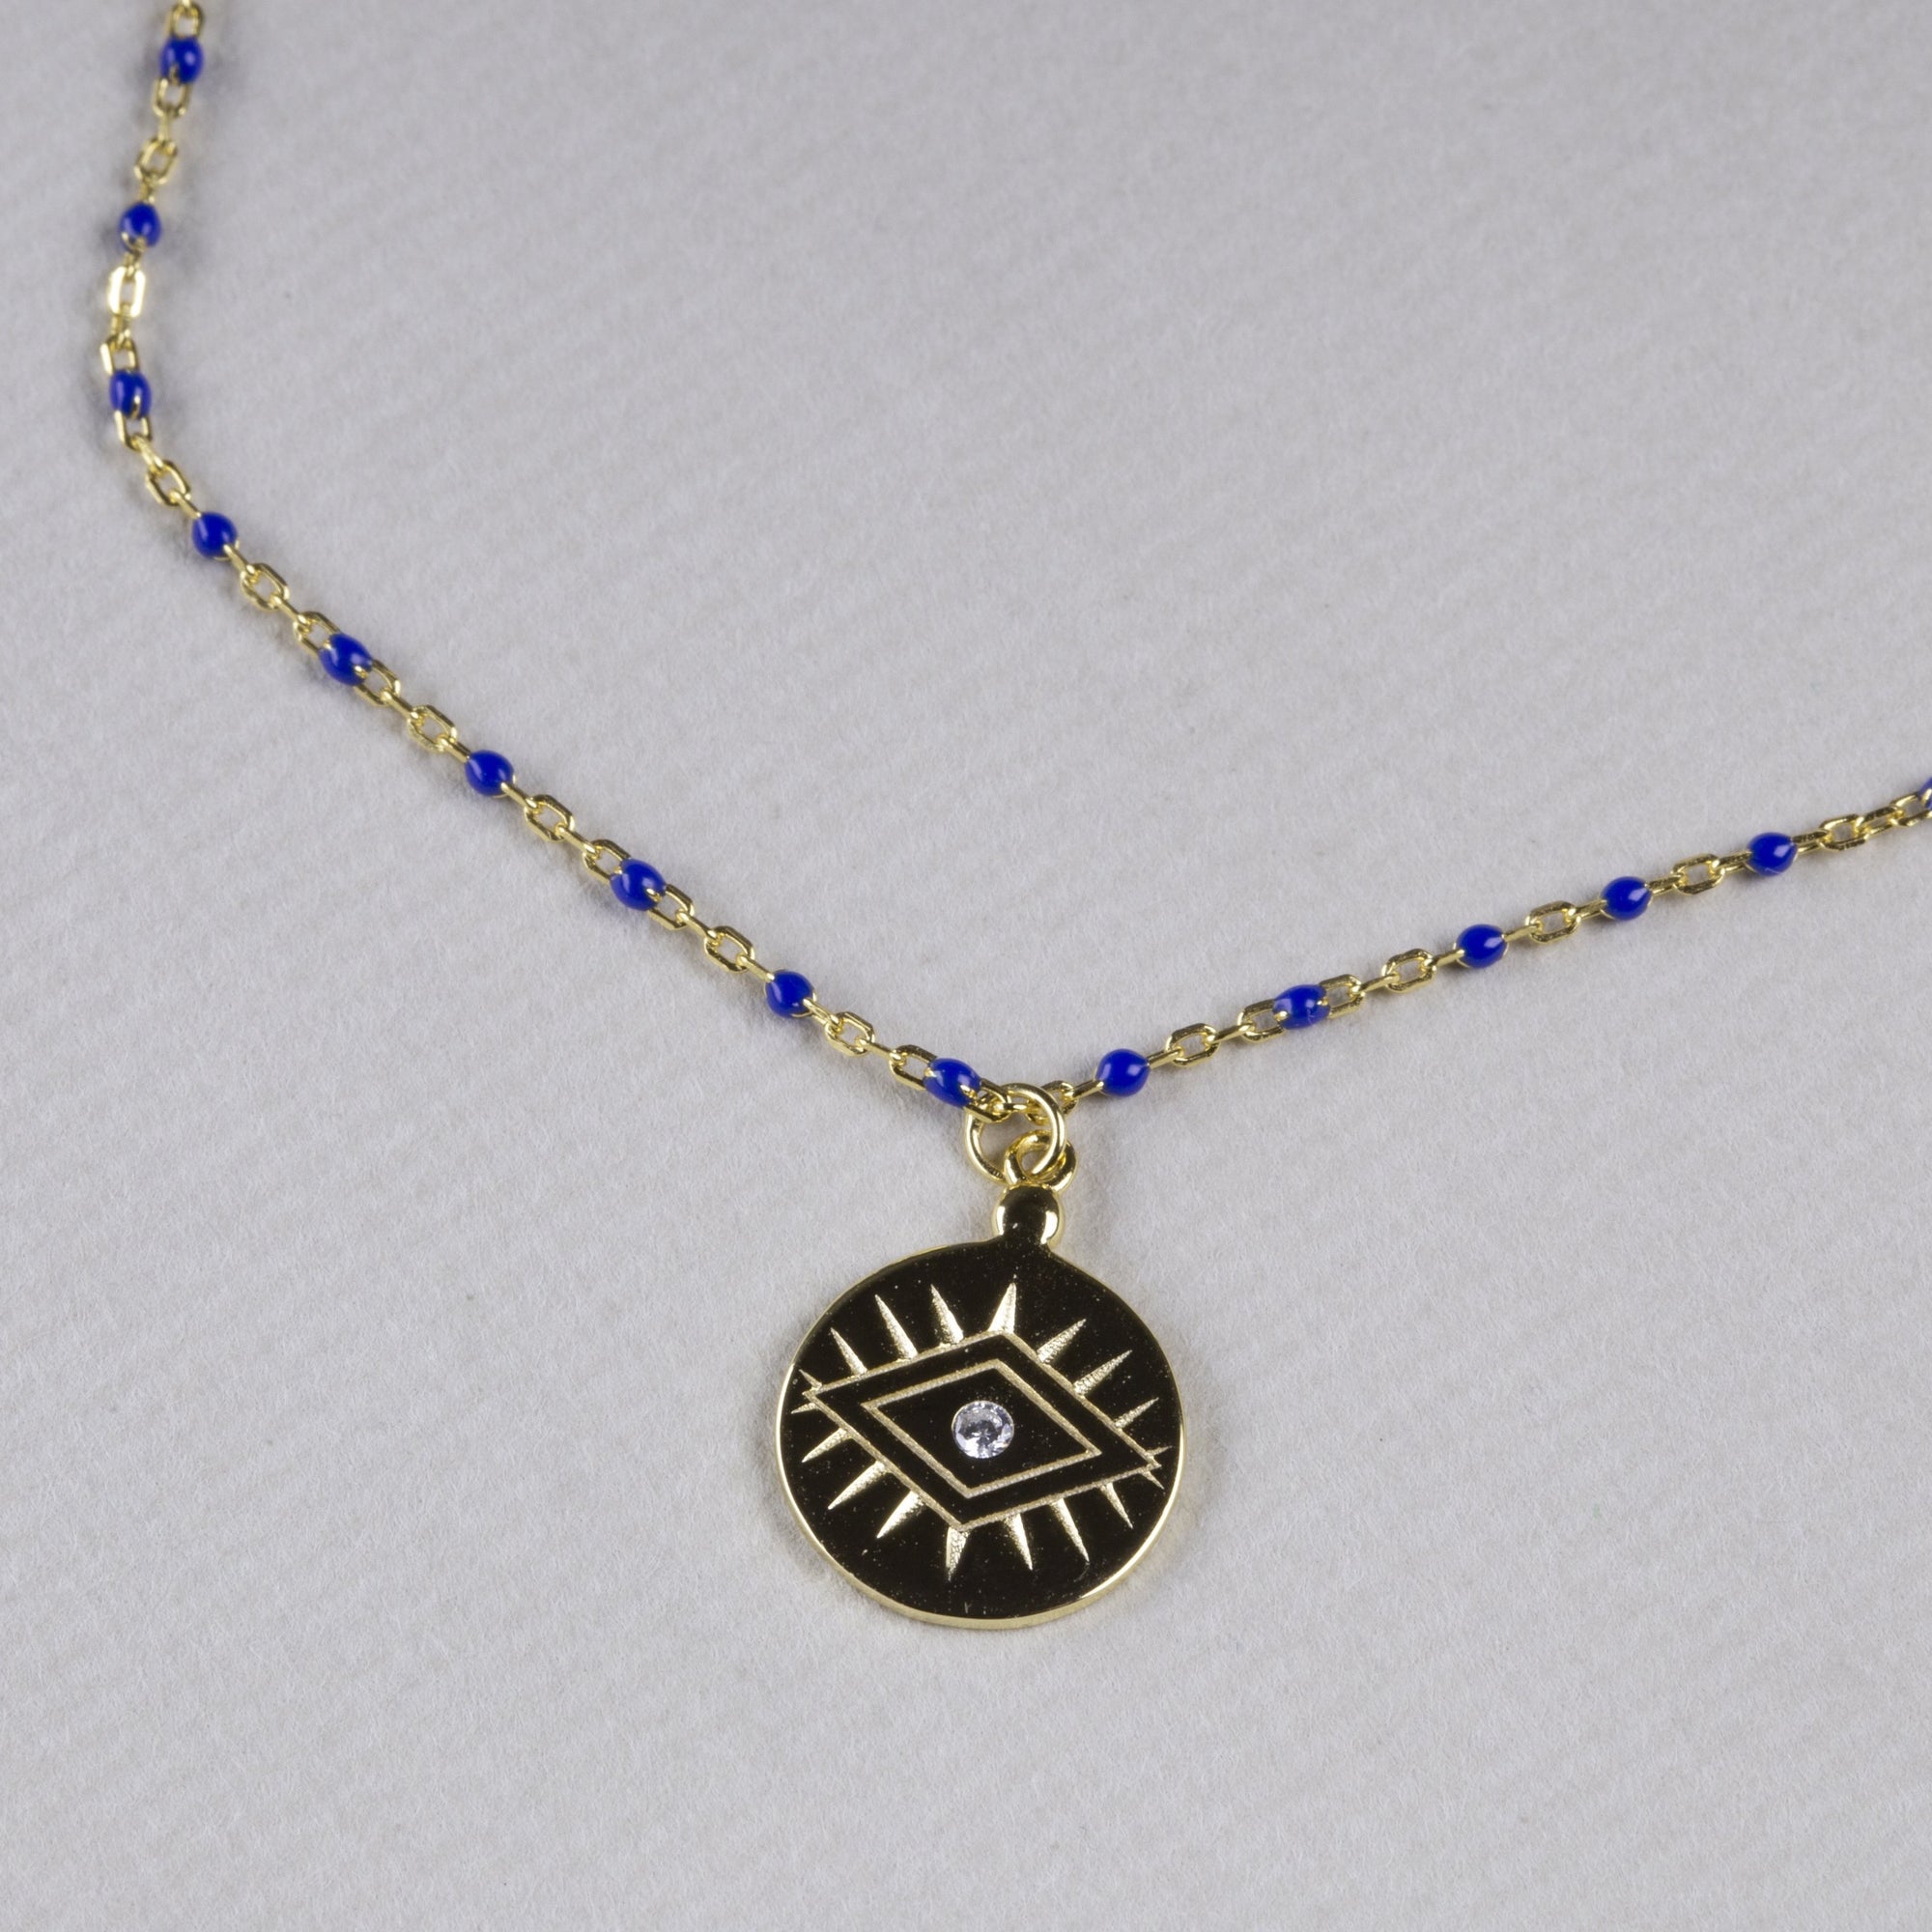 Coin Pendant Necklace with Gold Chain and Blue Beads